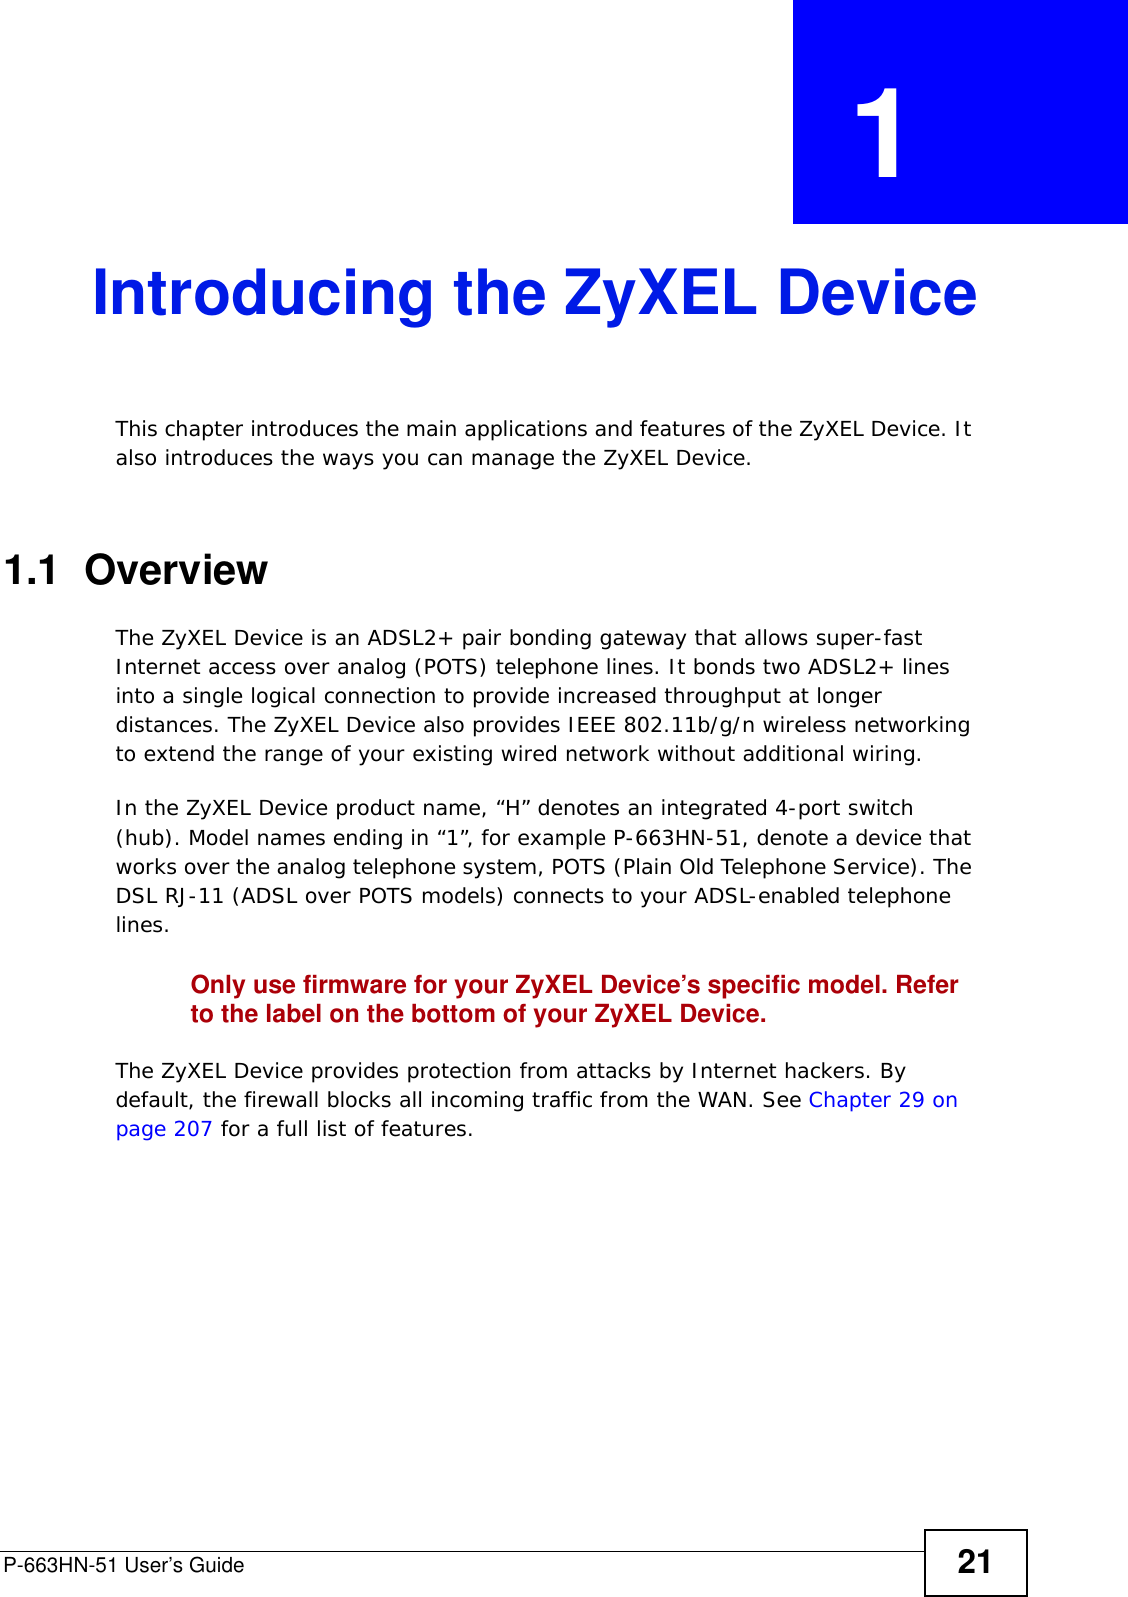 P-663HN-51 User’s Guide 21CHAPTER  1 Introducing the ZyXEL DeviceThis chapter introduces the main applications and features of the ZyXEL Device. It also introduces the ways you can manage the ZyXEL Device.1.1  OverviewThe ZyXEL Device is an ADSL2+ pair bonding gateway that allows super-fast Internet access over analog (POTS) telephone lines. It bonds two ADSL2+ lines into a single logical connection to provide increased throughput at longer distances. The ZyXEL Device also provides IEEE 802.11b/g/n wireless networking to extend the range of your existing wired network without additional wiring.In the ZyXEL Device product name, “H” denotes an integrated 4-port switch (hub). Model names ending in “1”, for example P-663HN-51, denote a device that works over the analog telephone system, POTS (Plain Old Telephone Service). The DSL RJ-11 (ADSL over POTS models) connects to your ADSL-enabled telephone lines. Only use firmware for your ZyXEL Device’s specific model. Refer to the label on the bottom of your ZyXEL Device.The ZyXEL Device provides protection from attacks by Internet hackers. By default, the firewall blocks all incoming traffic from the WAN. See Chapter 29 on page 207 for a full list of features.